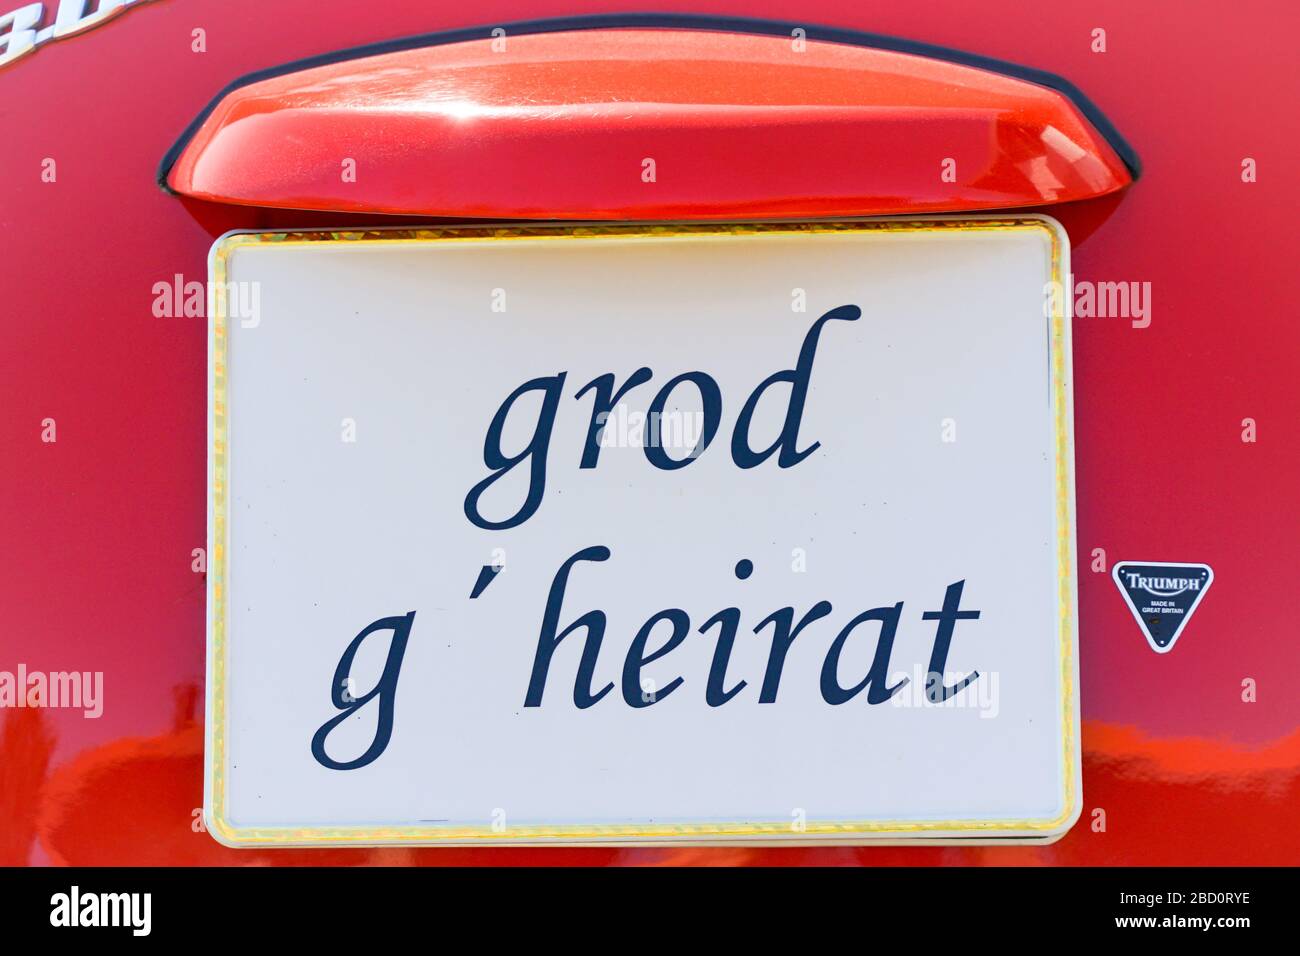 Sign Grod gheirat (Just Married in Bavarian) on the rear lid of a classic VW beetle Stock Photo